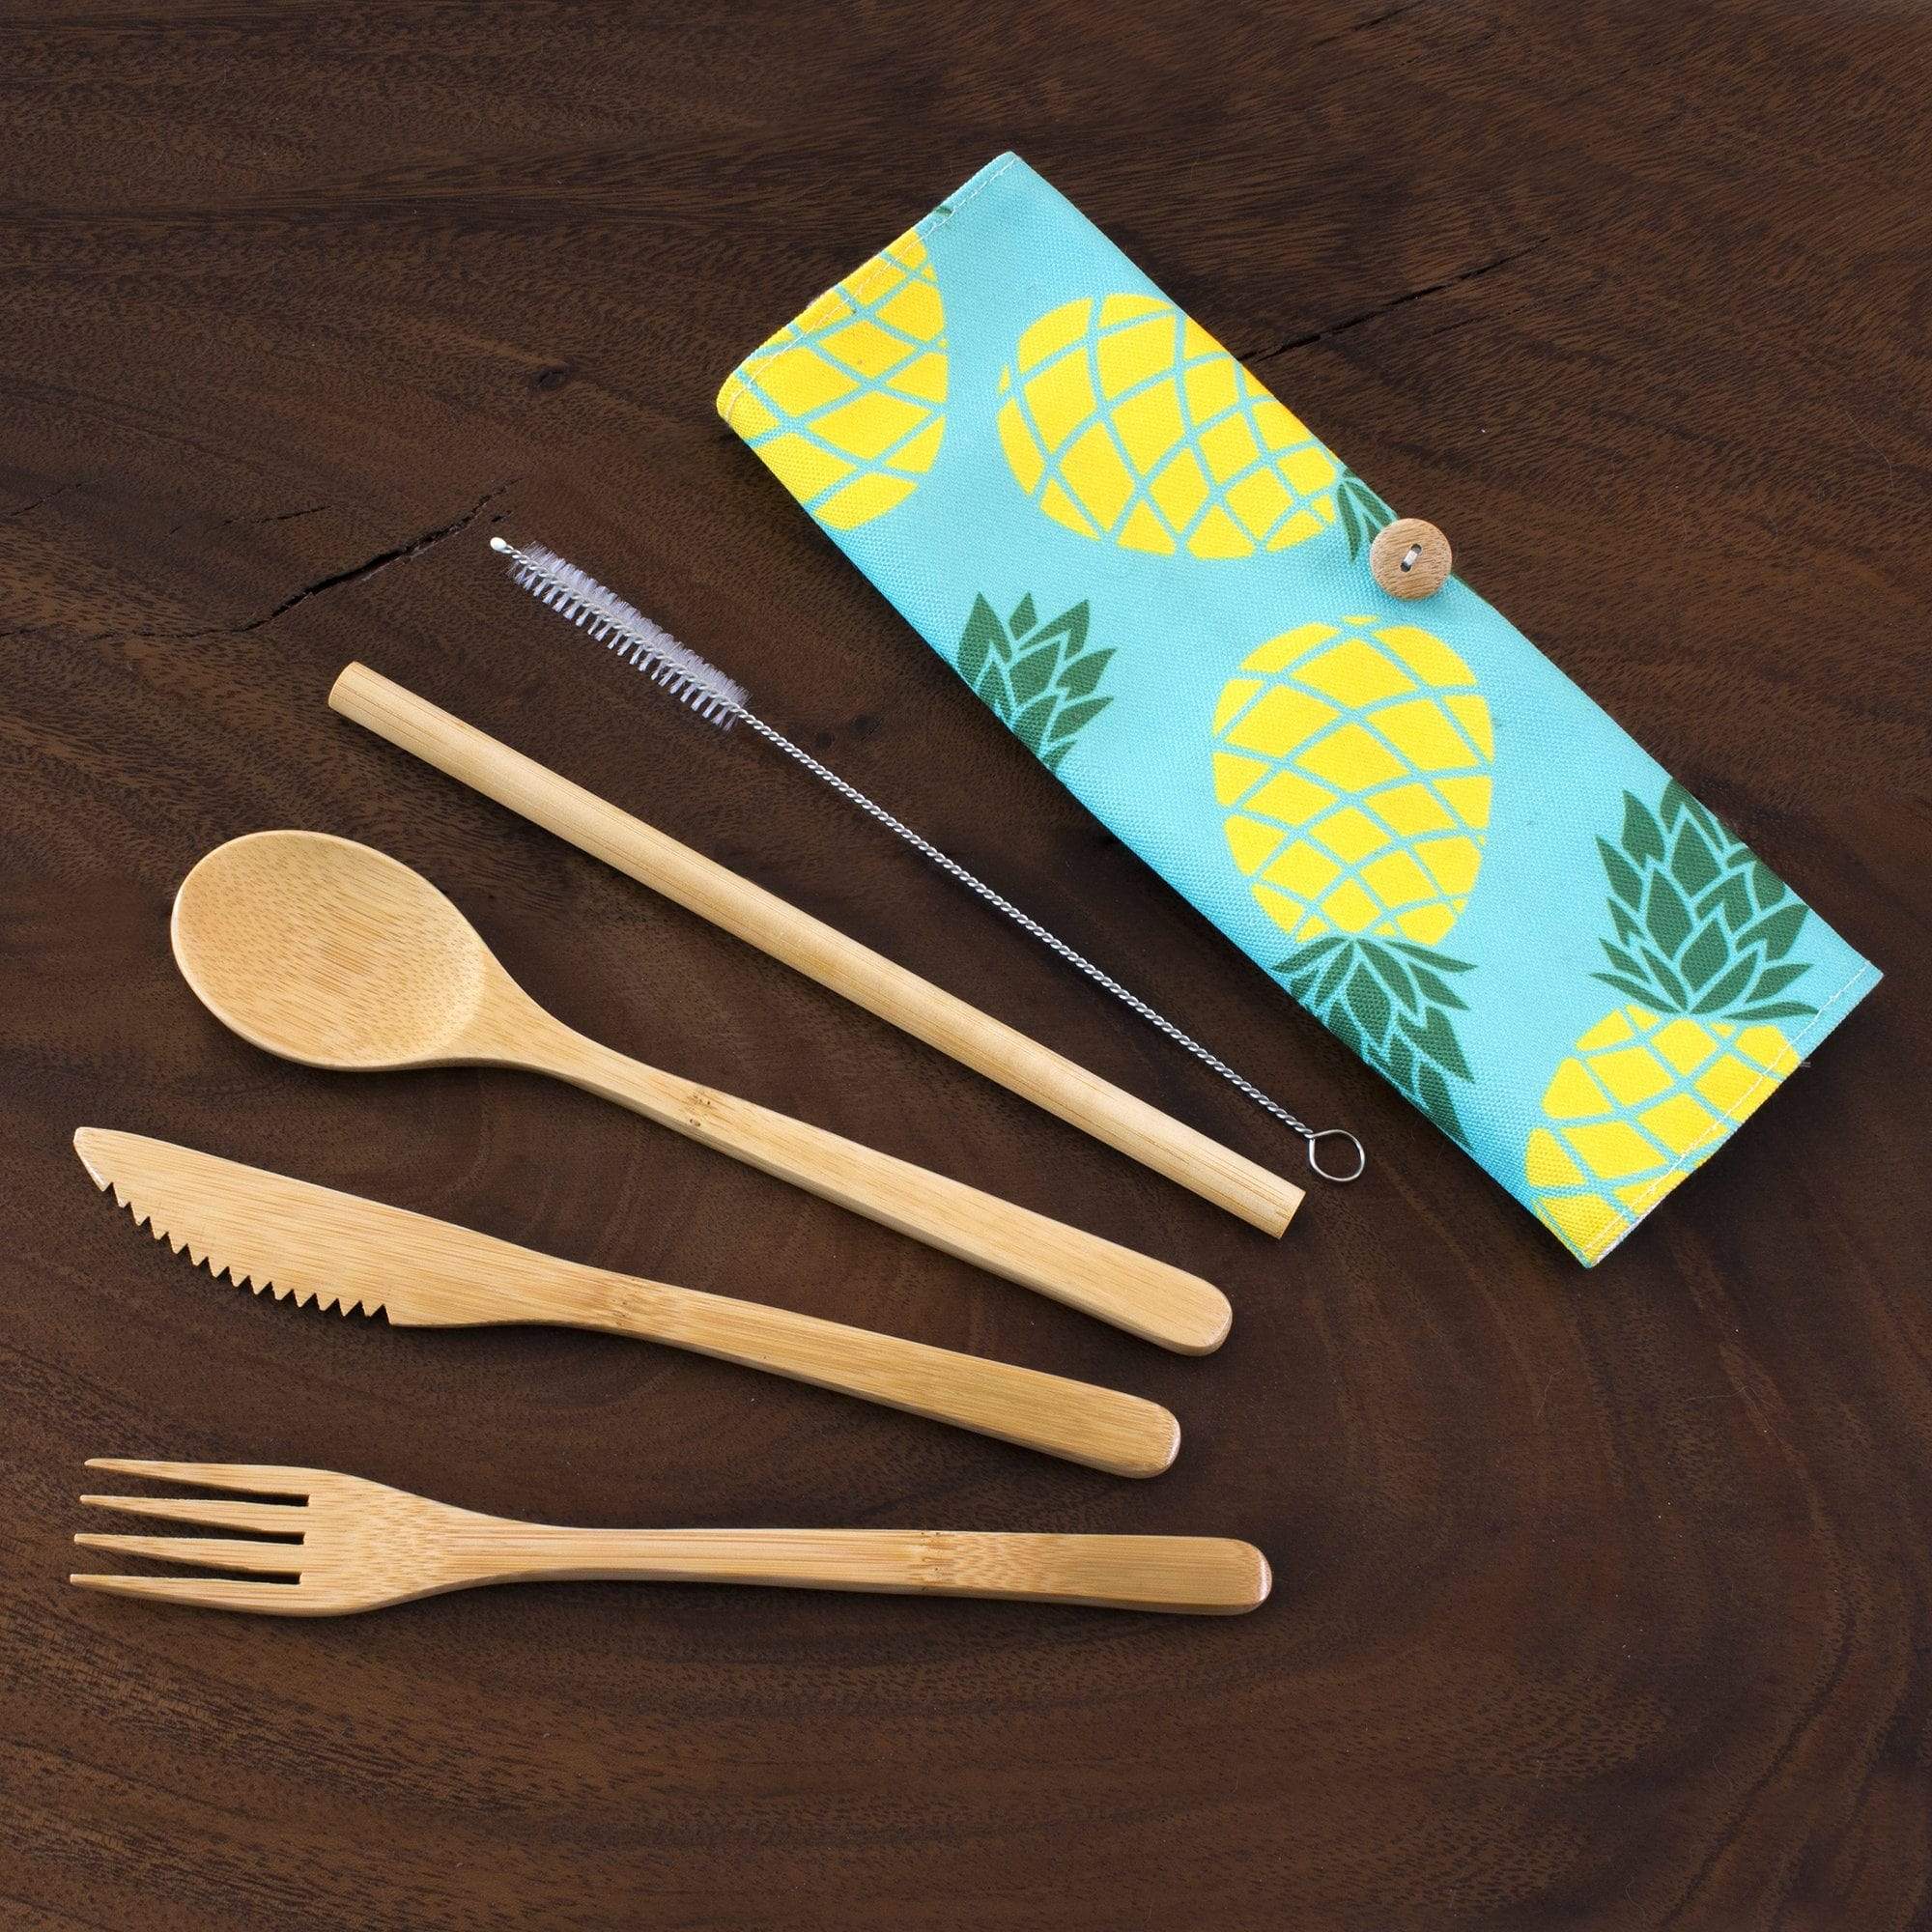 Totally Bamboo Take Along Reusable Utensil Set with Pineapple Style Travel Case